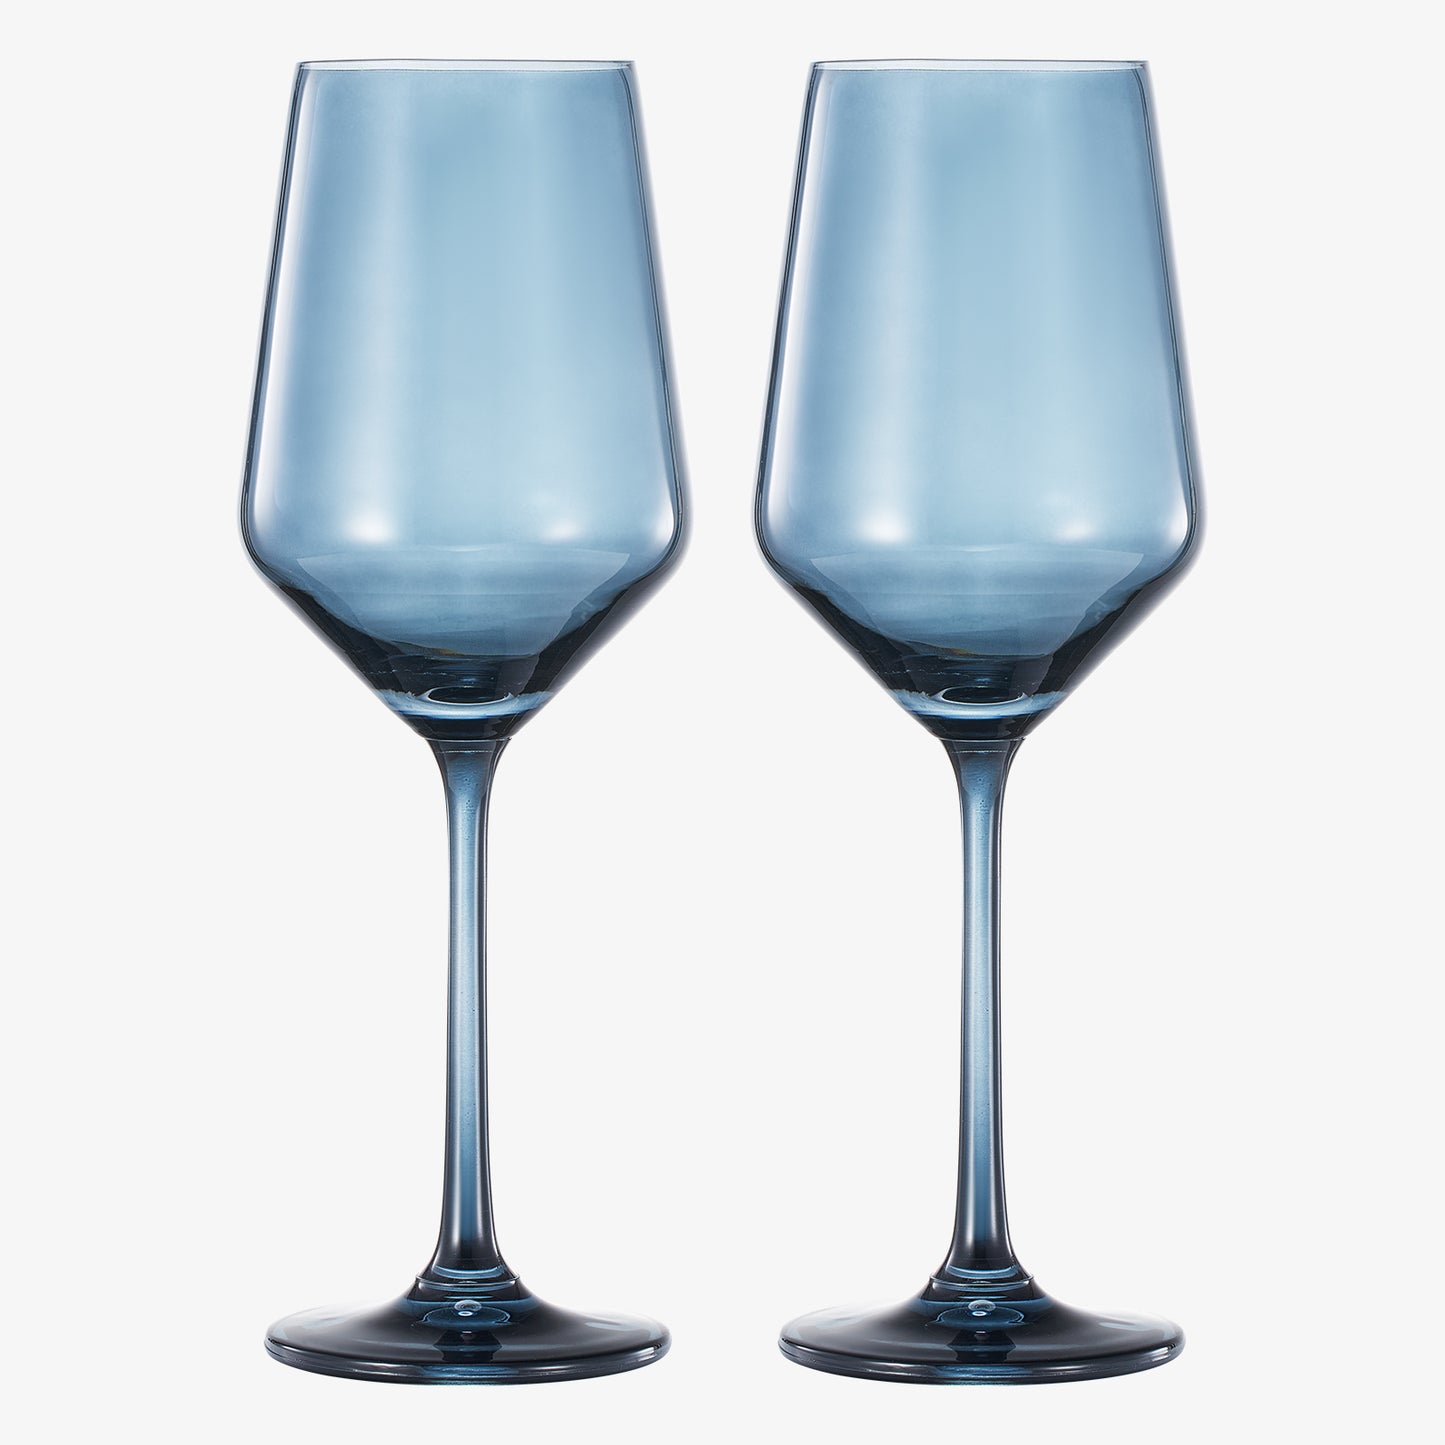 Tonal Colored Wine Glassware, Cloudy Blue, Set of 2